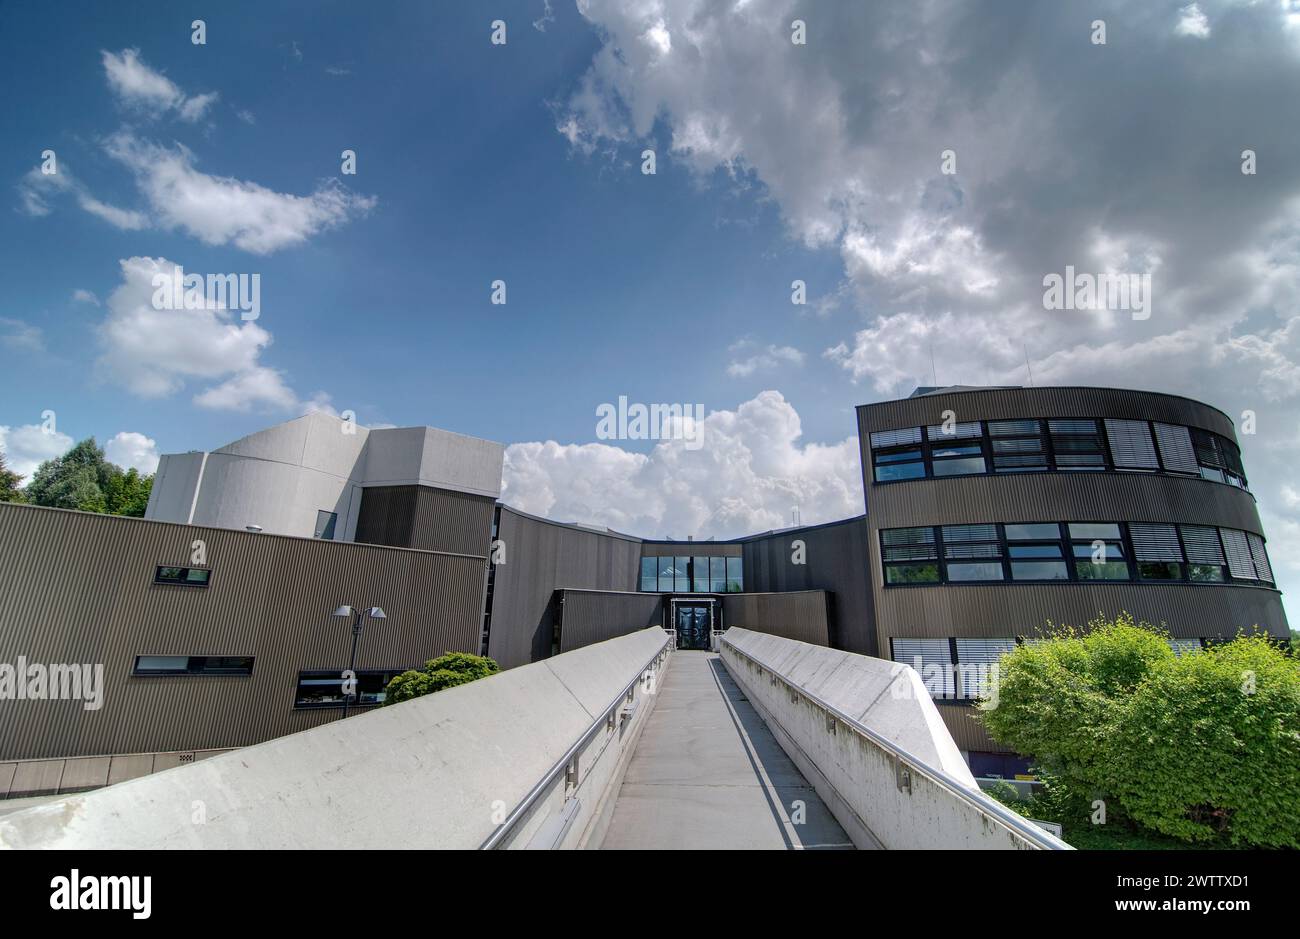 Modern building with a ramp entrance under a cloudy sky Stock Photo